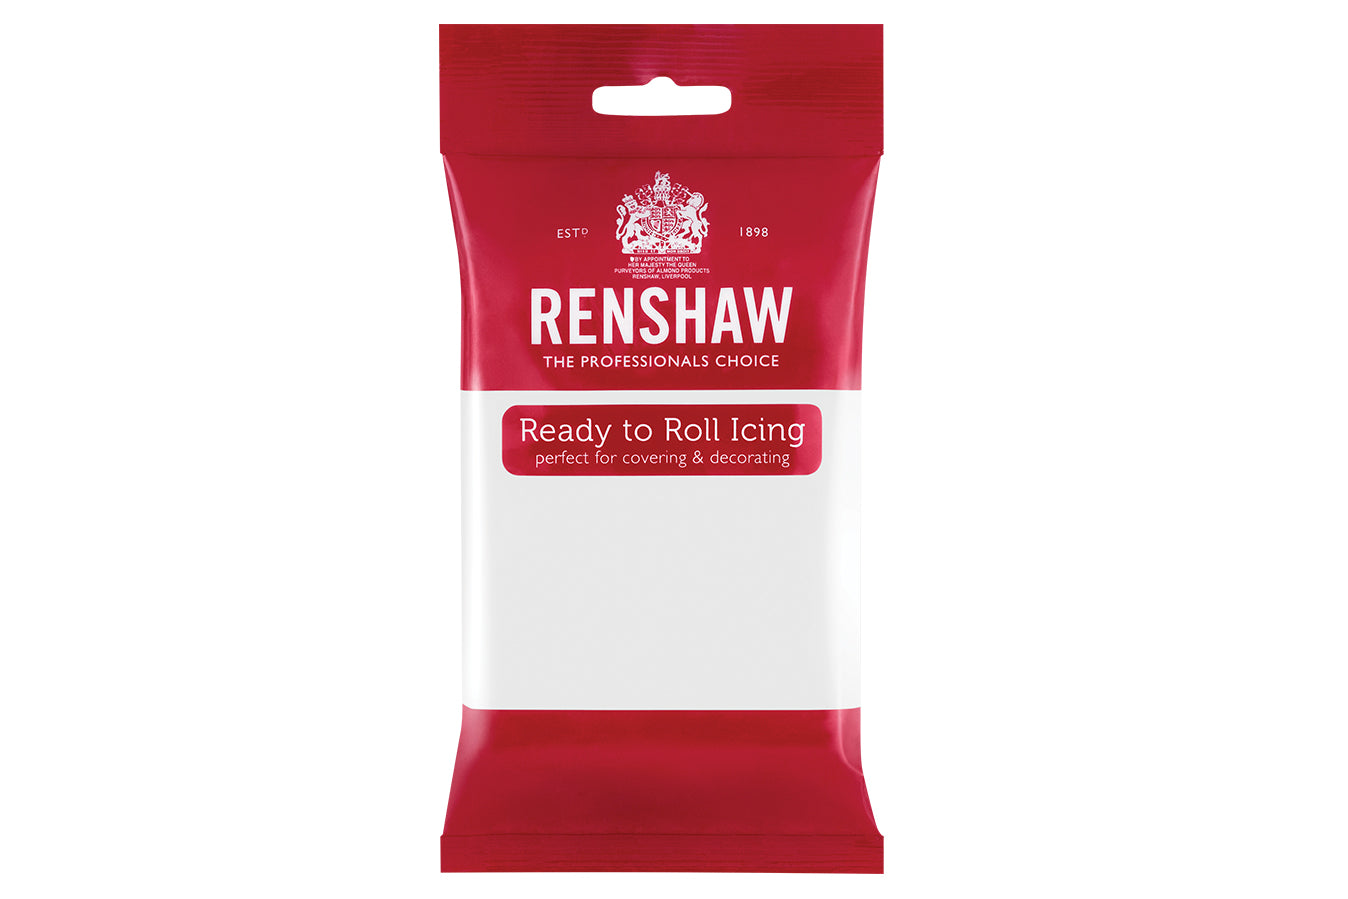 Renshaw Just Roll With It Sugar Paste 250g - White